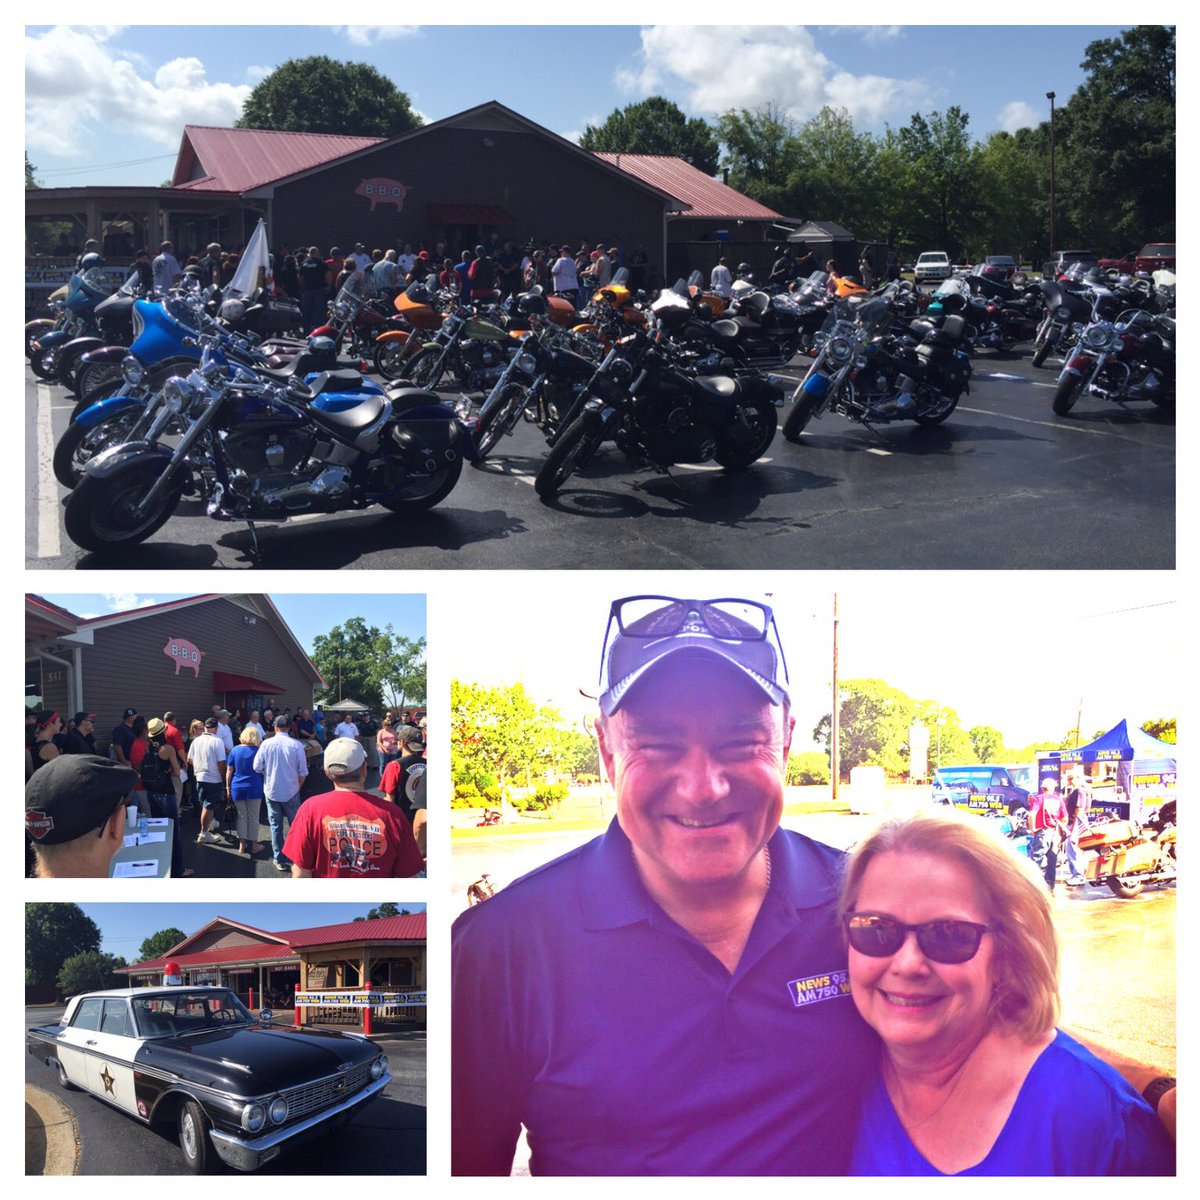 MUCH love shown at Saturday's 4th Annual Capt'n Herb Emory Motorcycle Ride benefitting Toys For Tots. Thanks to all #rememberingcaptainherb